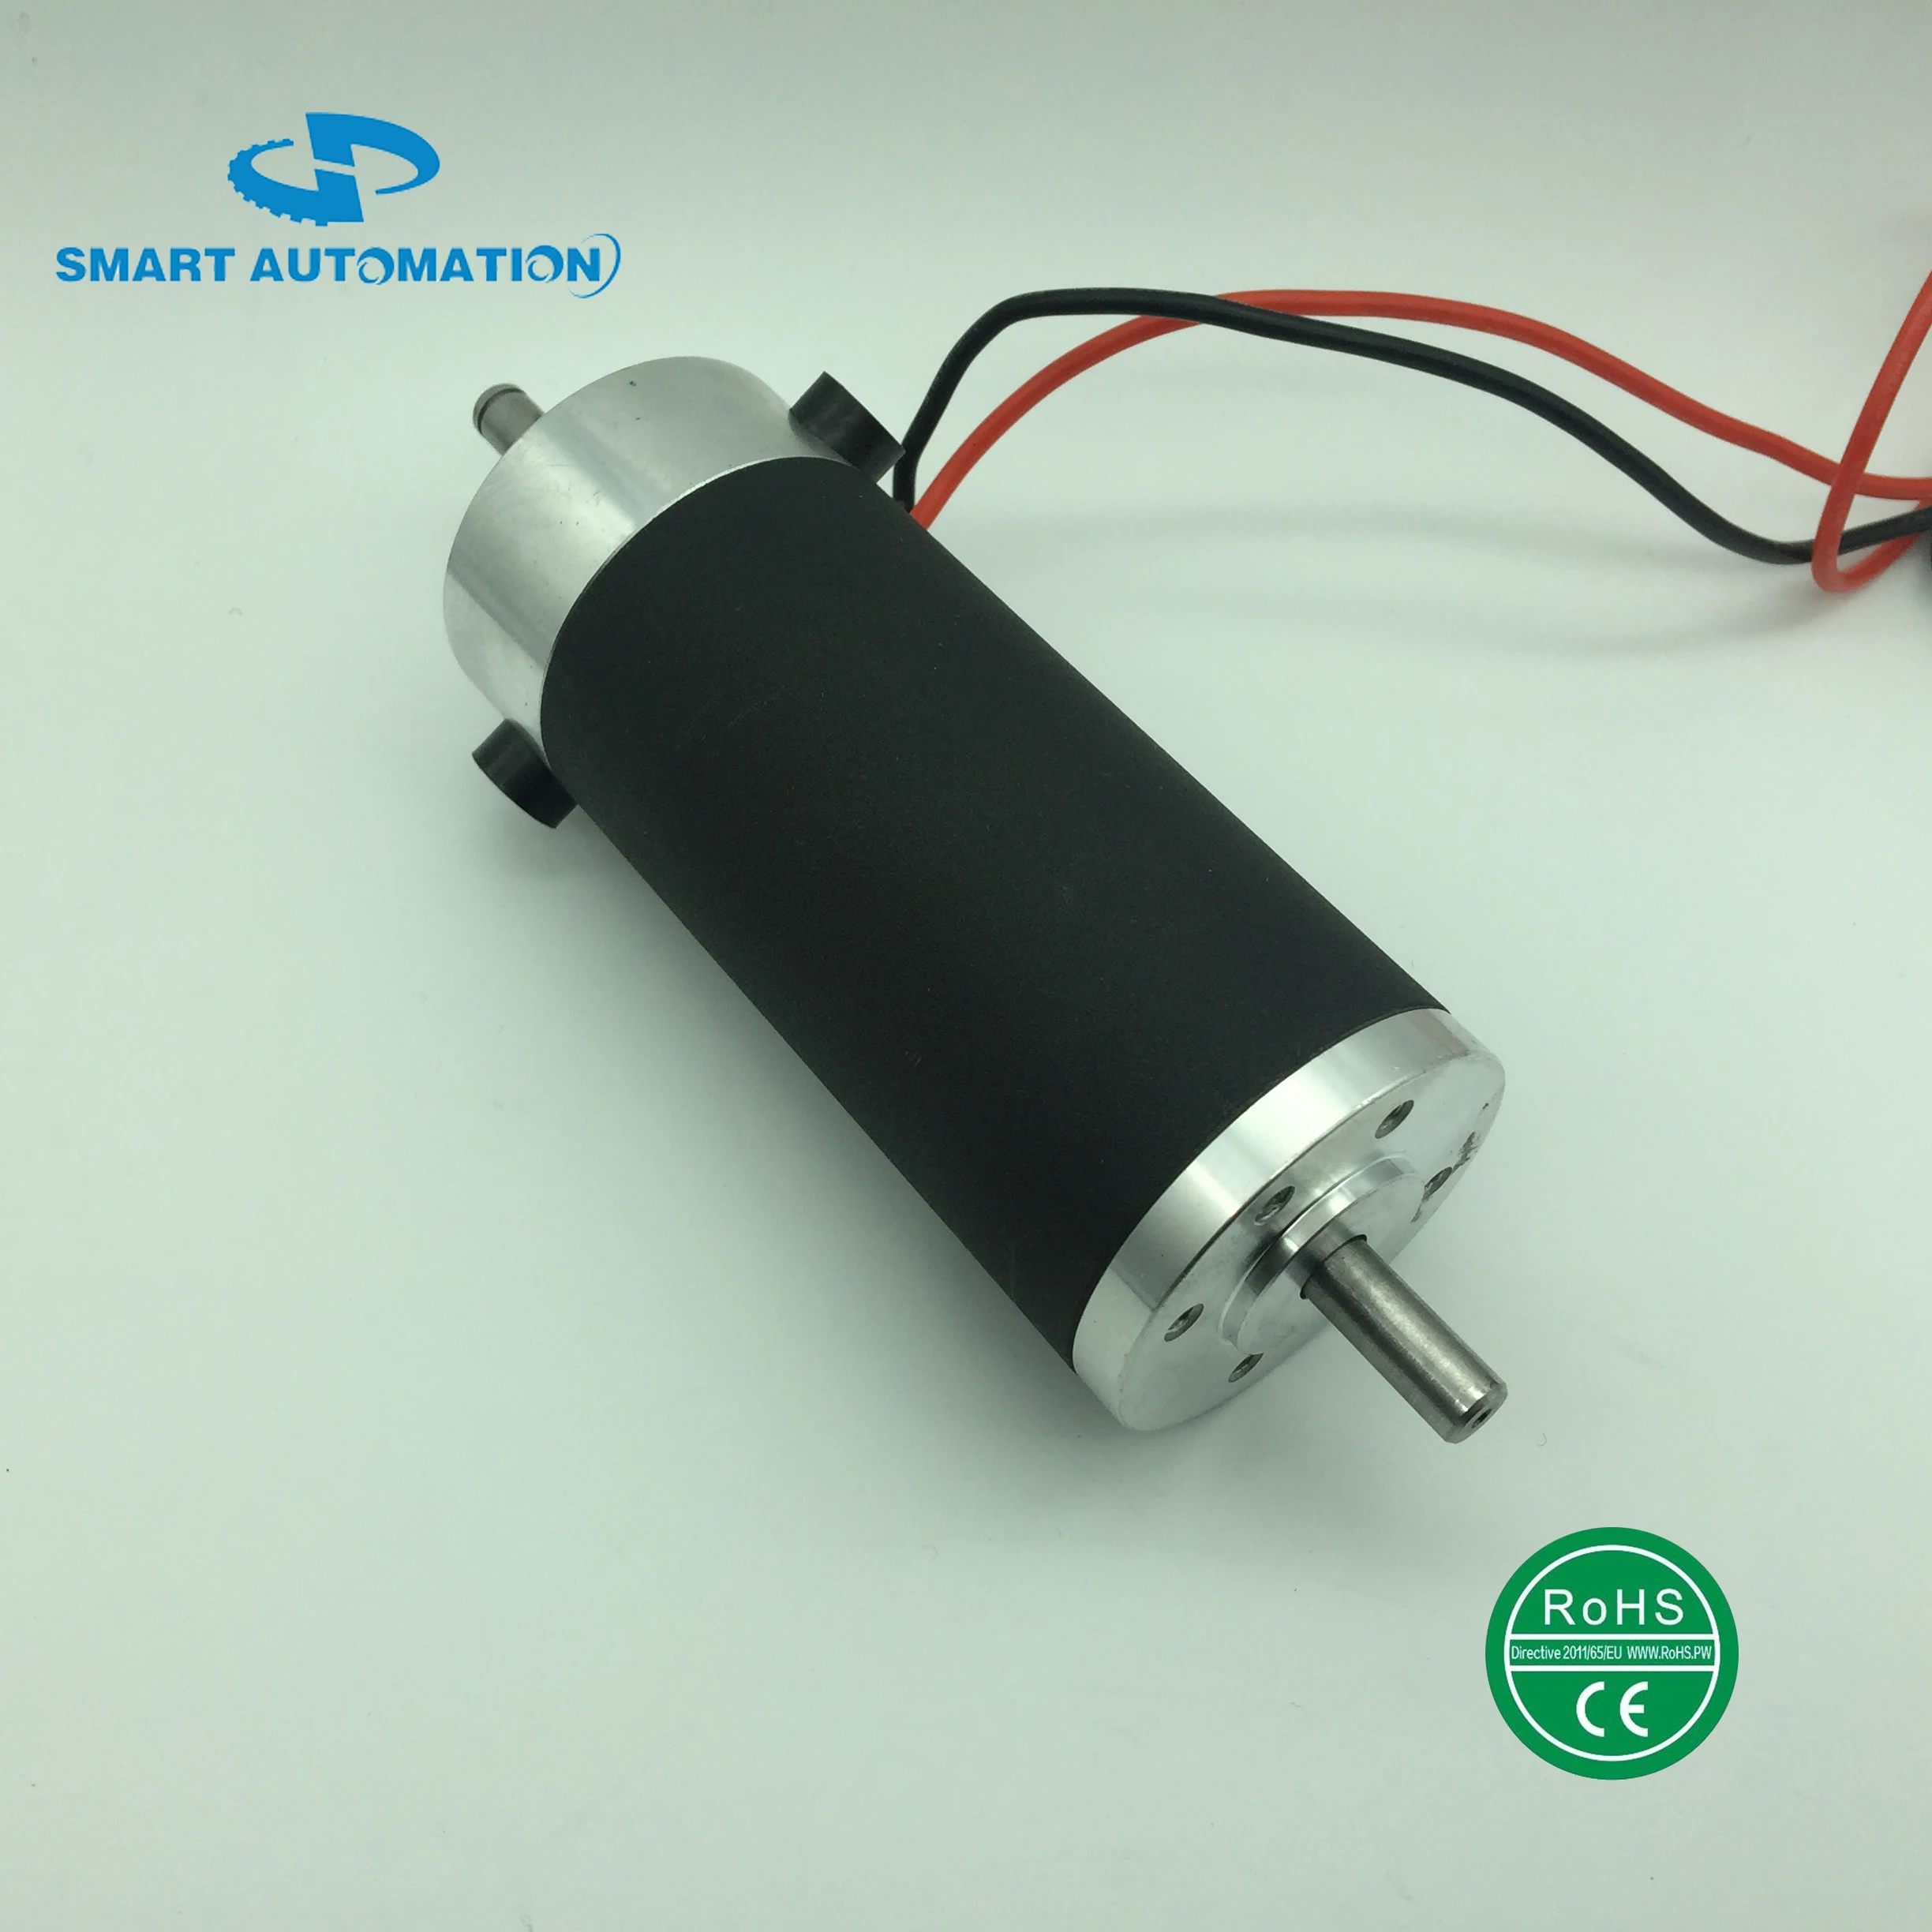 52ZYT series 52mm Brushed Electric Dc Motor Equivalent to Gr53 upto 200w